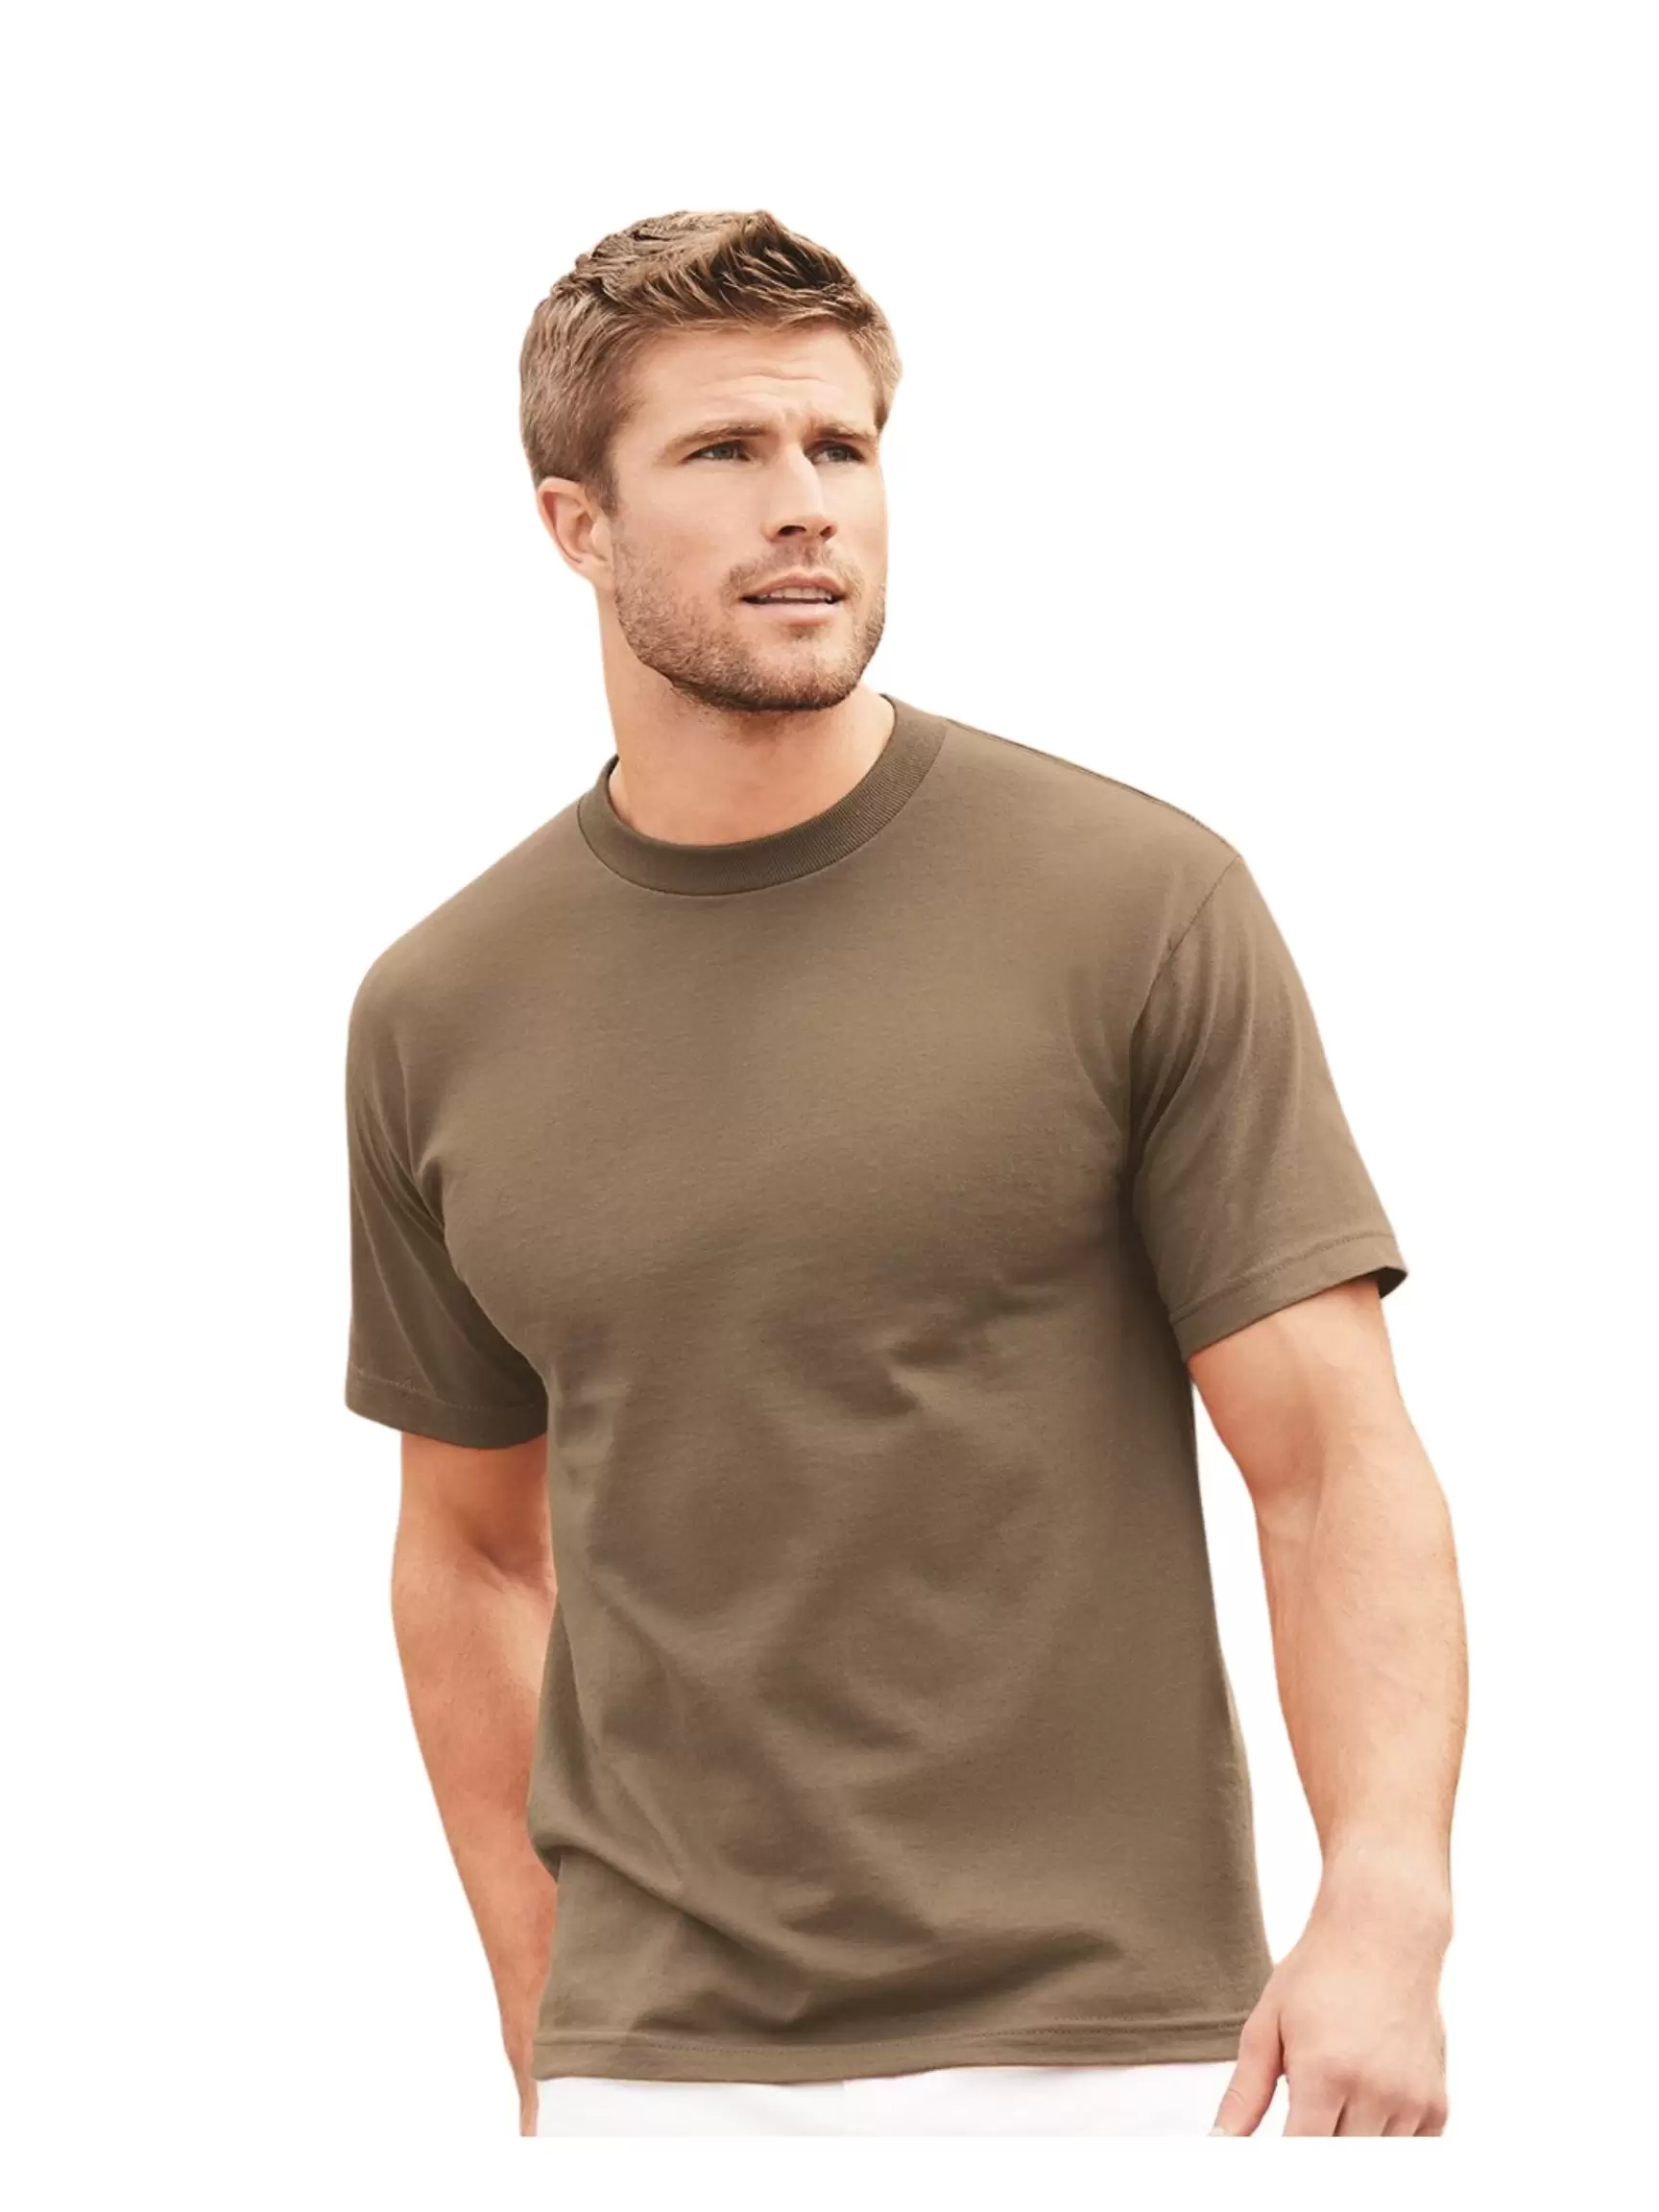 Alstyle 1301 Heavyweight Plain T Shirt by American Apparel Wholesale